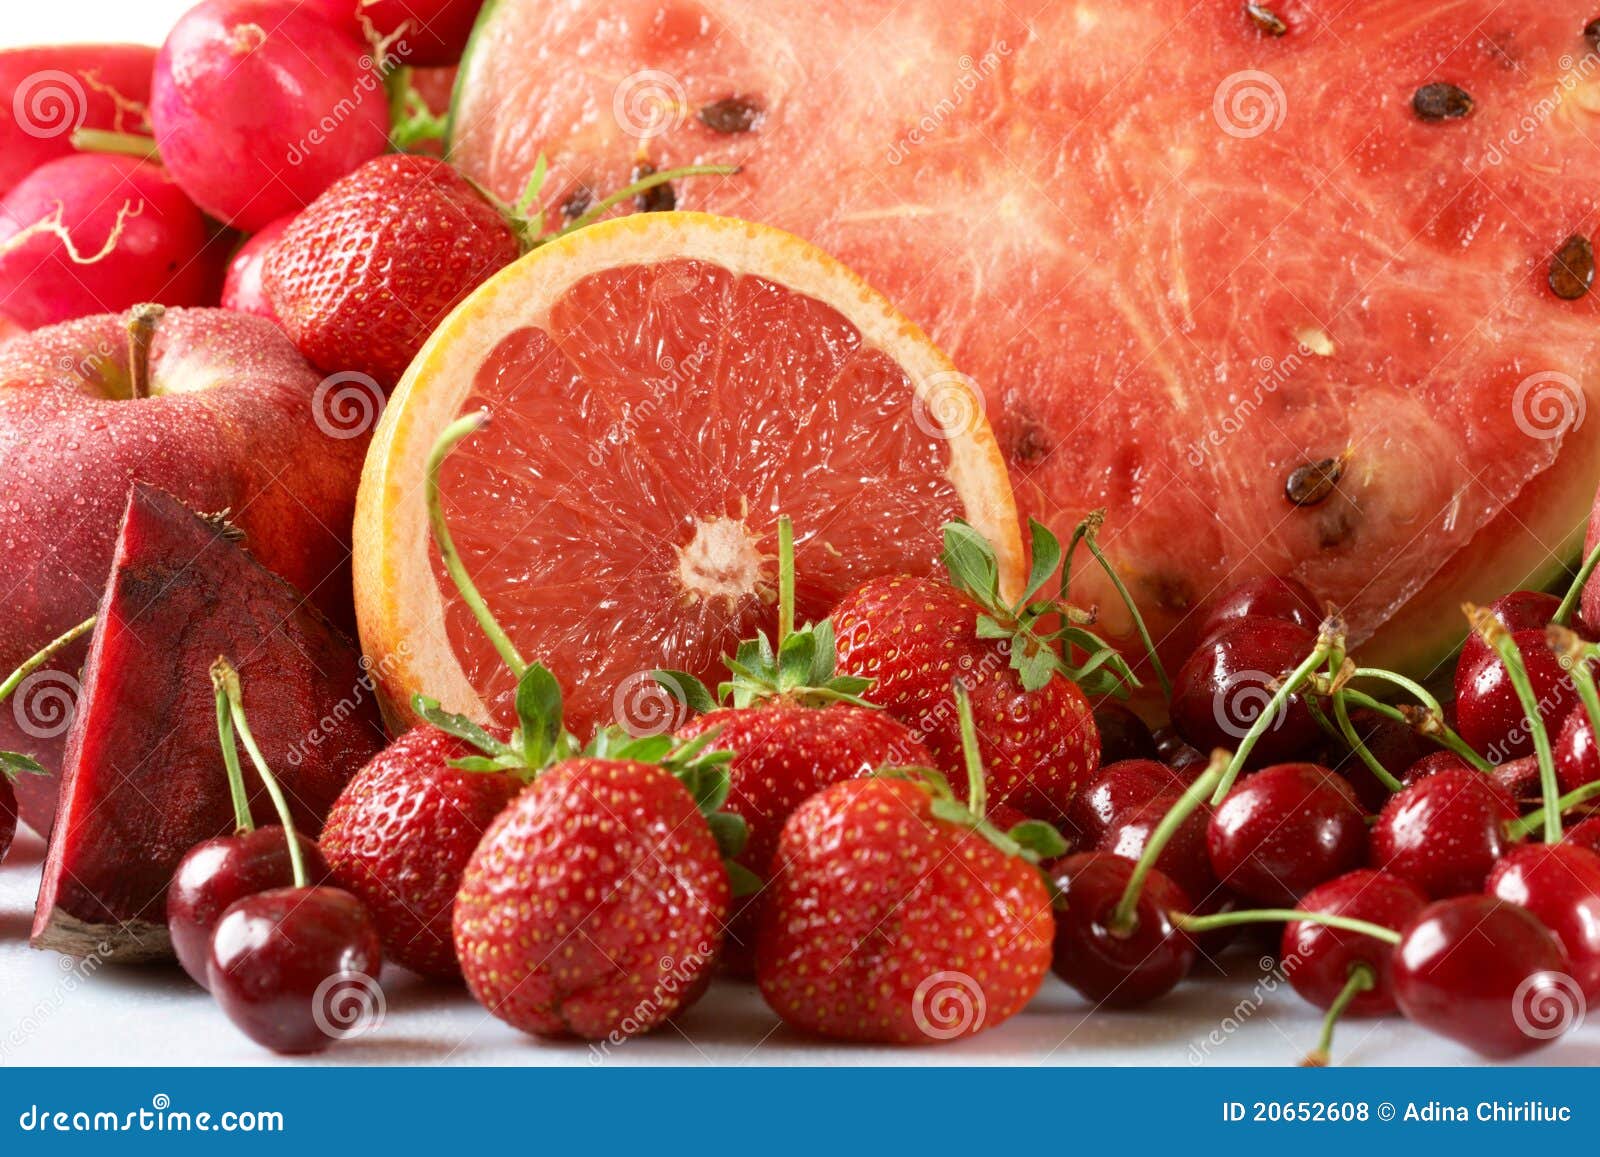 Red Fruits And Vegetables Stock Photo Image Of Breakfast 20652608